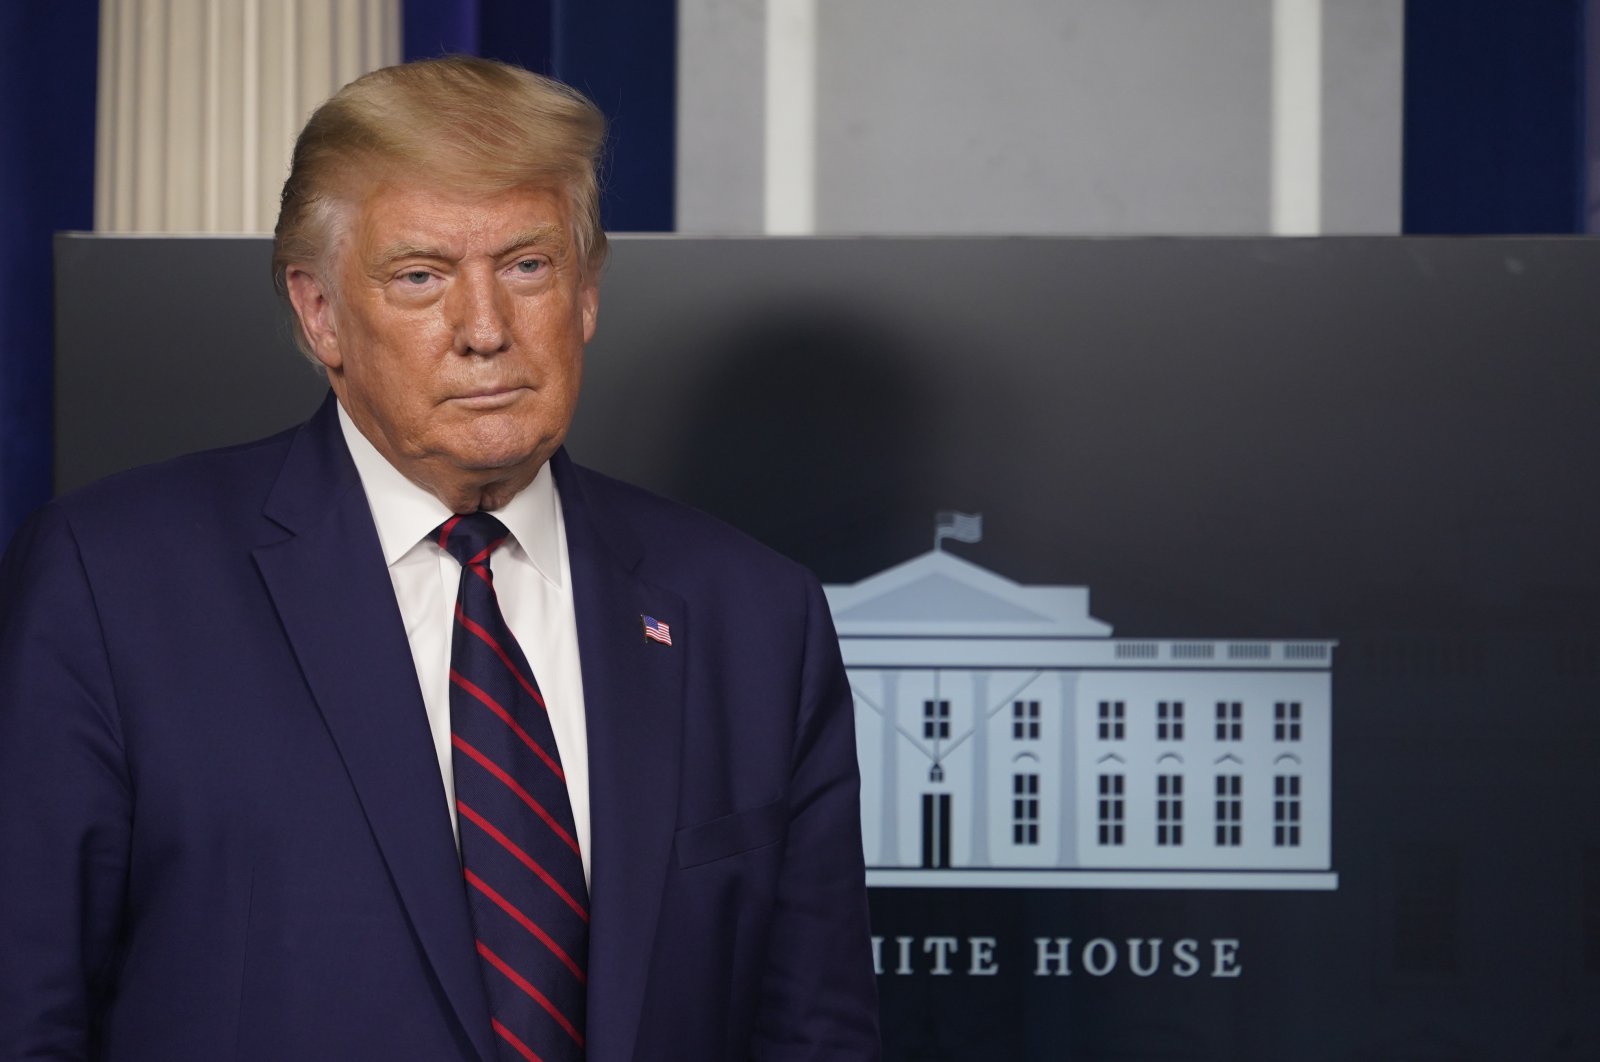 U.S. President Donald J. Trump holds a news briefing at the White House in Washington, D.C., U.S., Sept. 4, 2020. (EPA Photo)